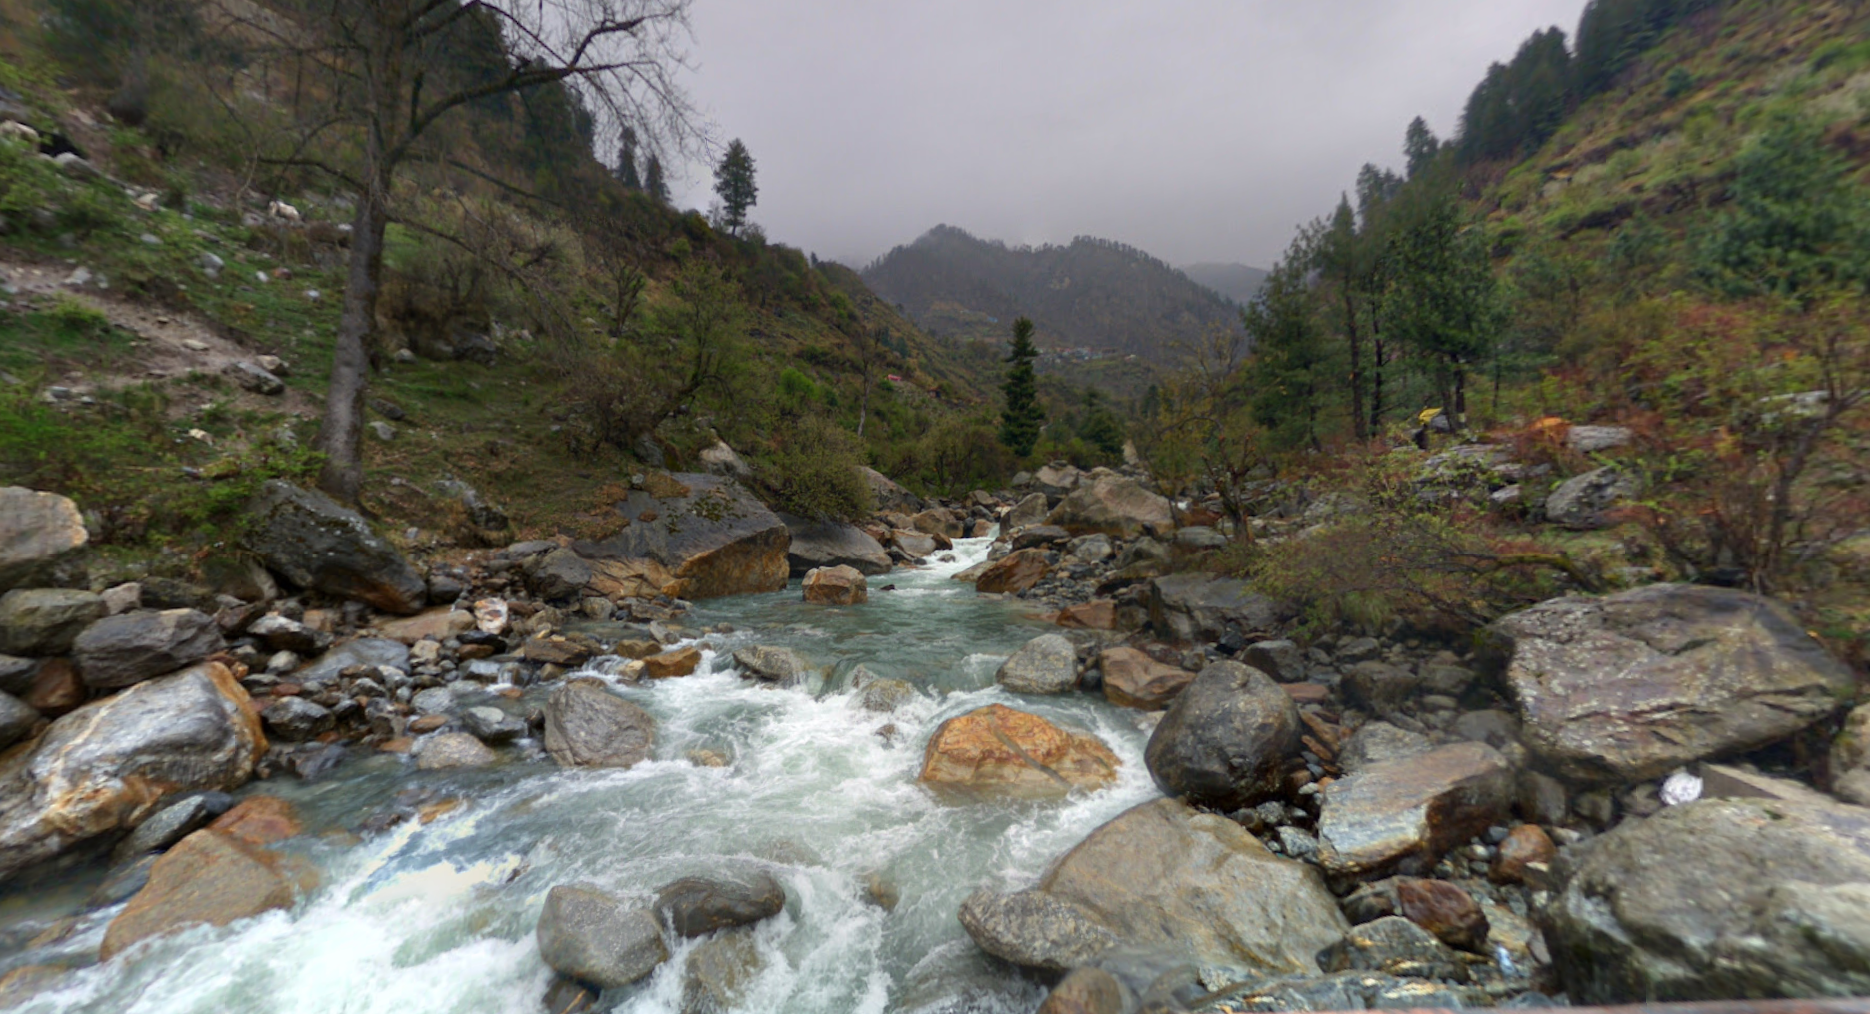 The Parvati Valley, pictured, is nicknamed the “Valley of Death” because several travelers have gone missing in the wilderness since the 1990s